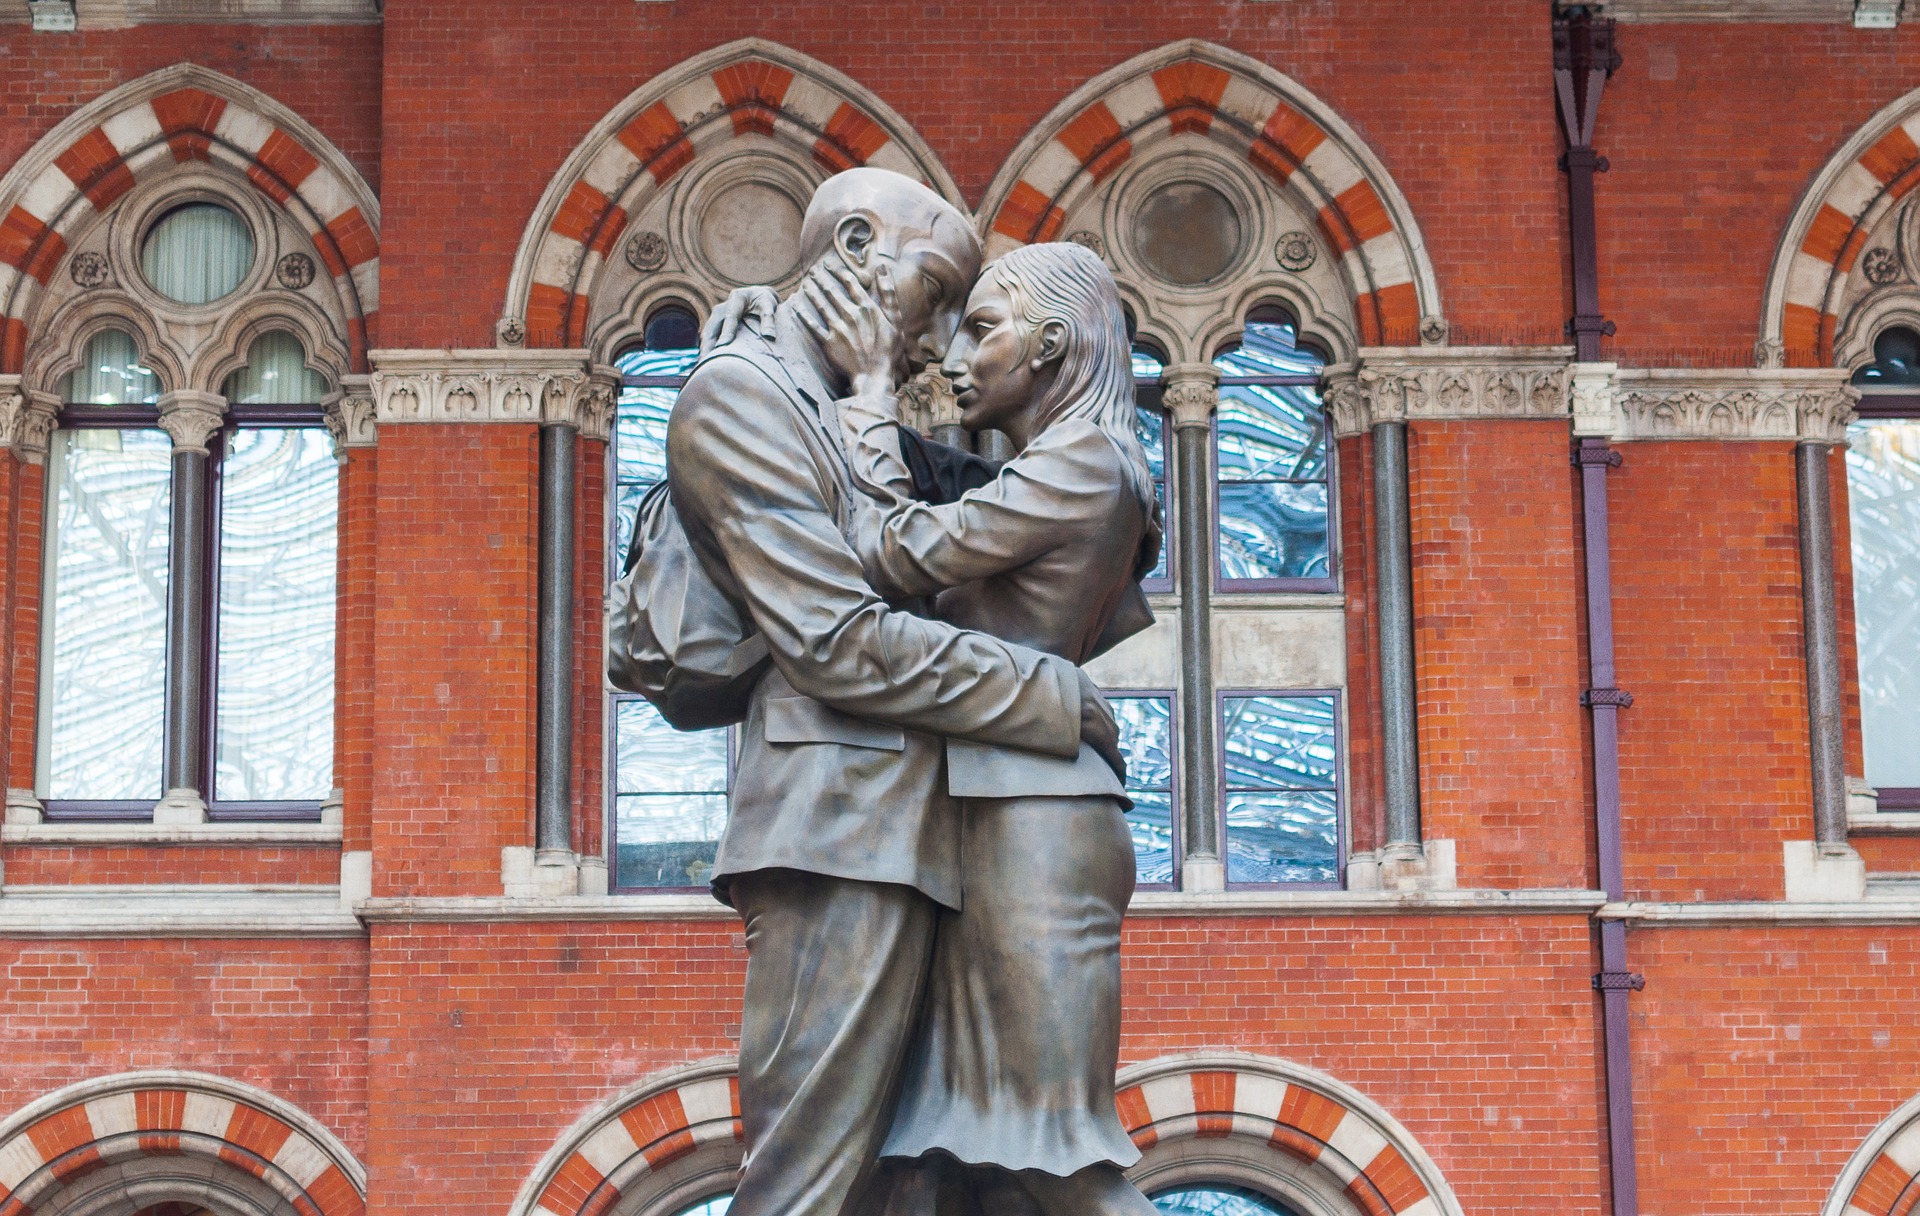 A statue of a woman and man embracing each other at the Gothic style train station of St. Pancras